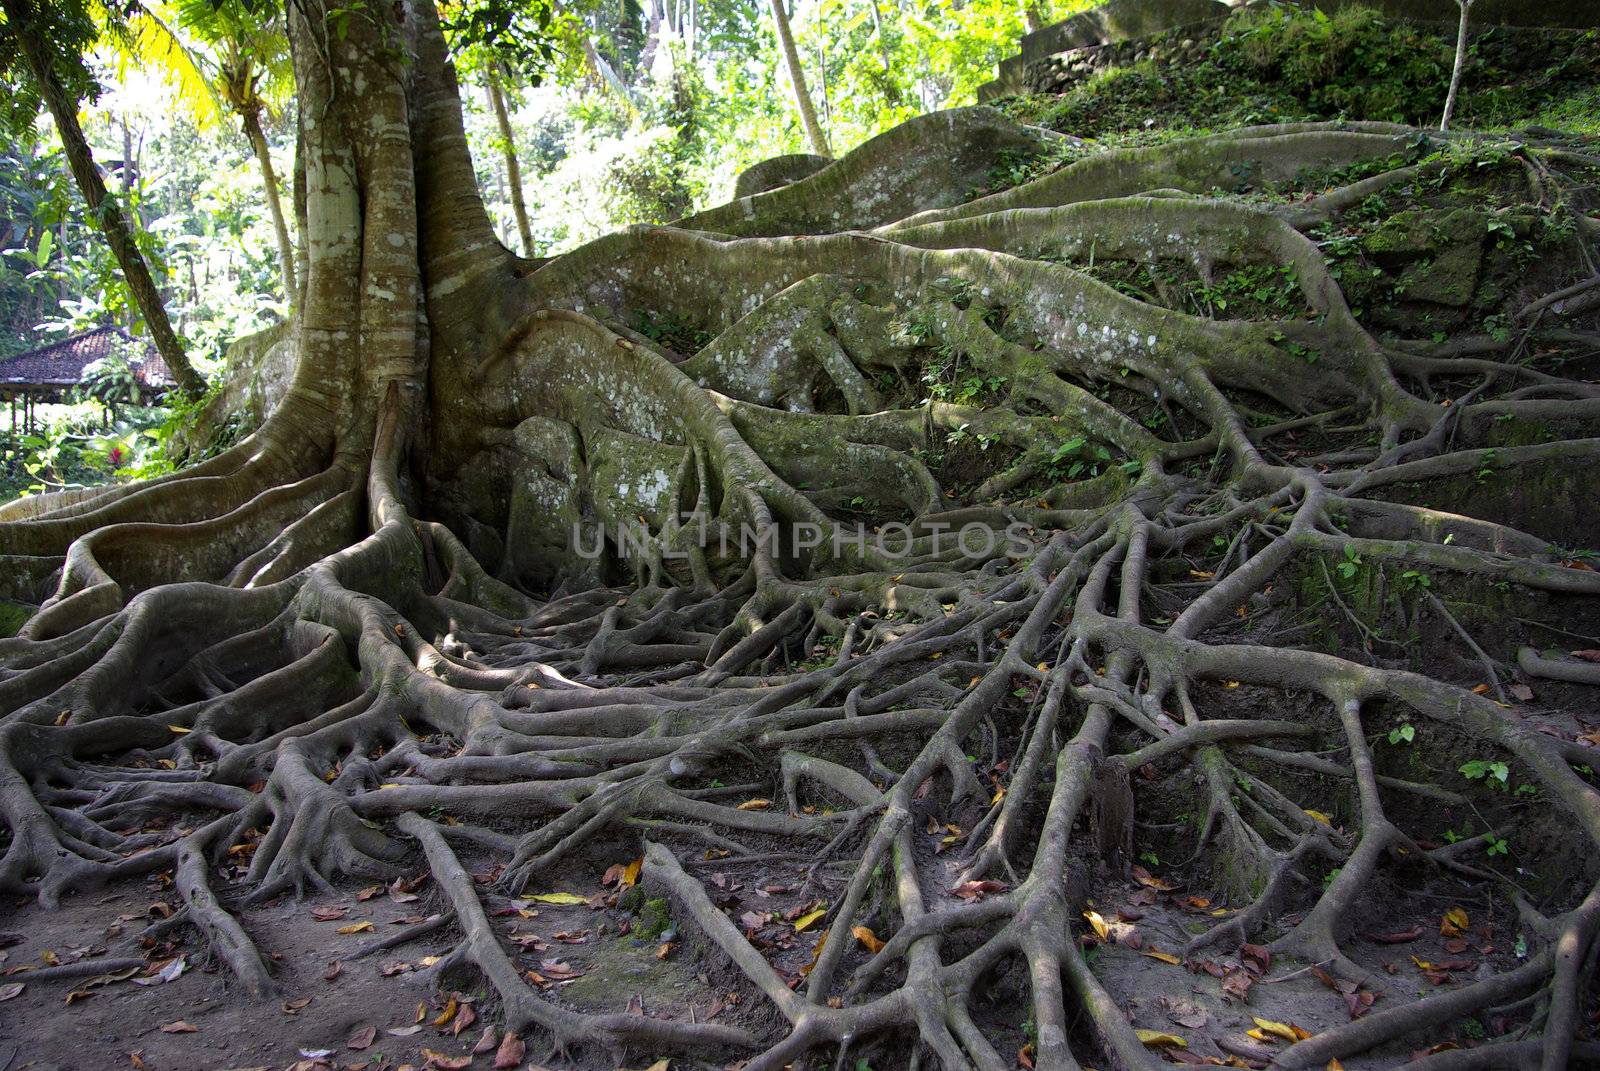 A view of a highly developed root system